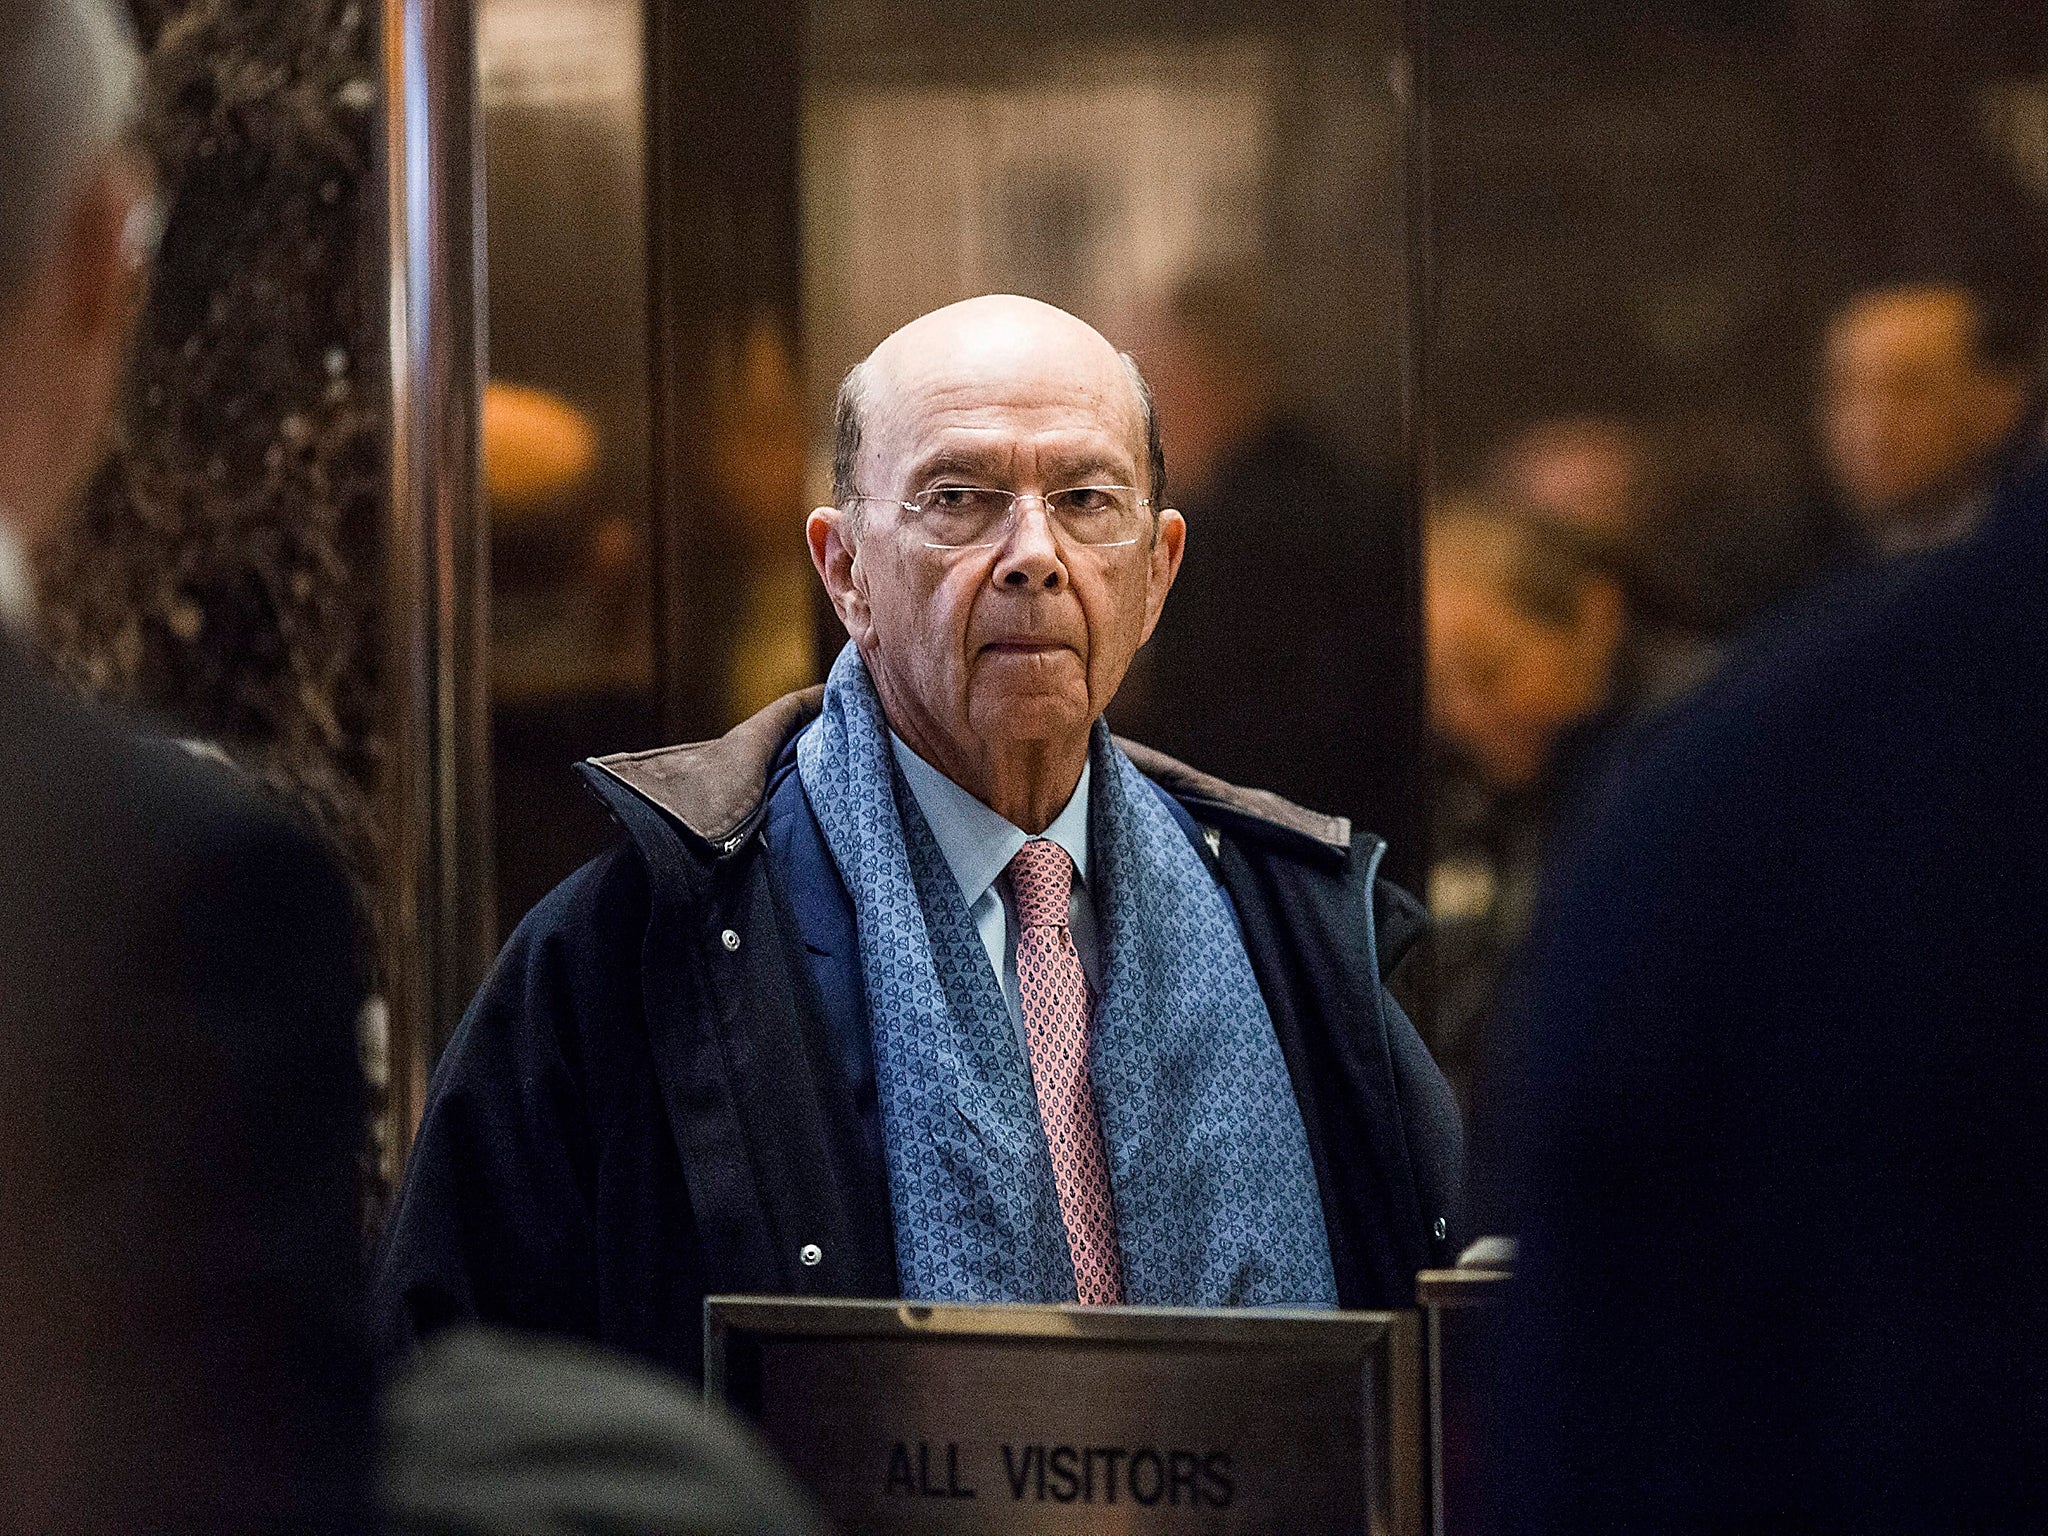 Secretary of Commerce Wilbur Ross may be violating ethics rules by retaining his stake in a large shipping company